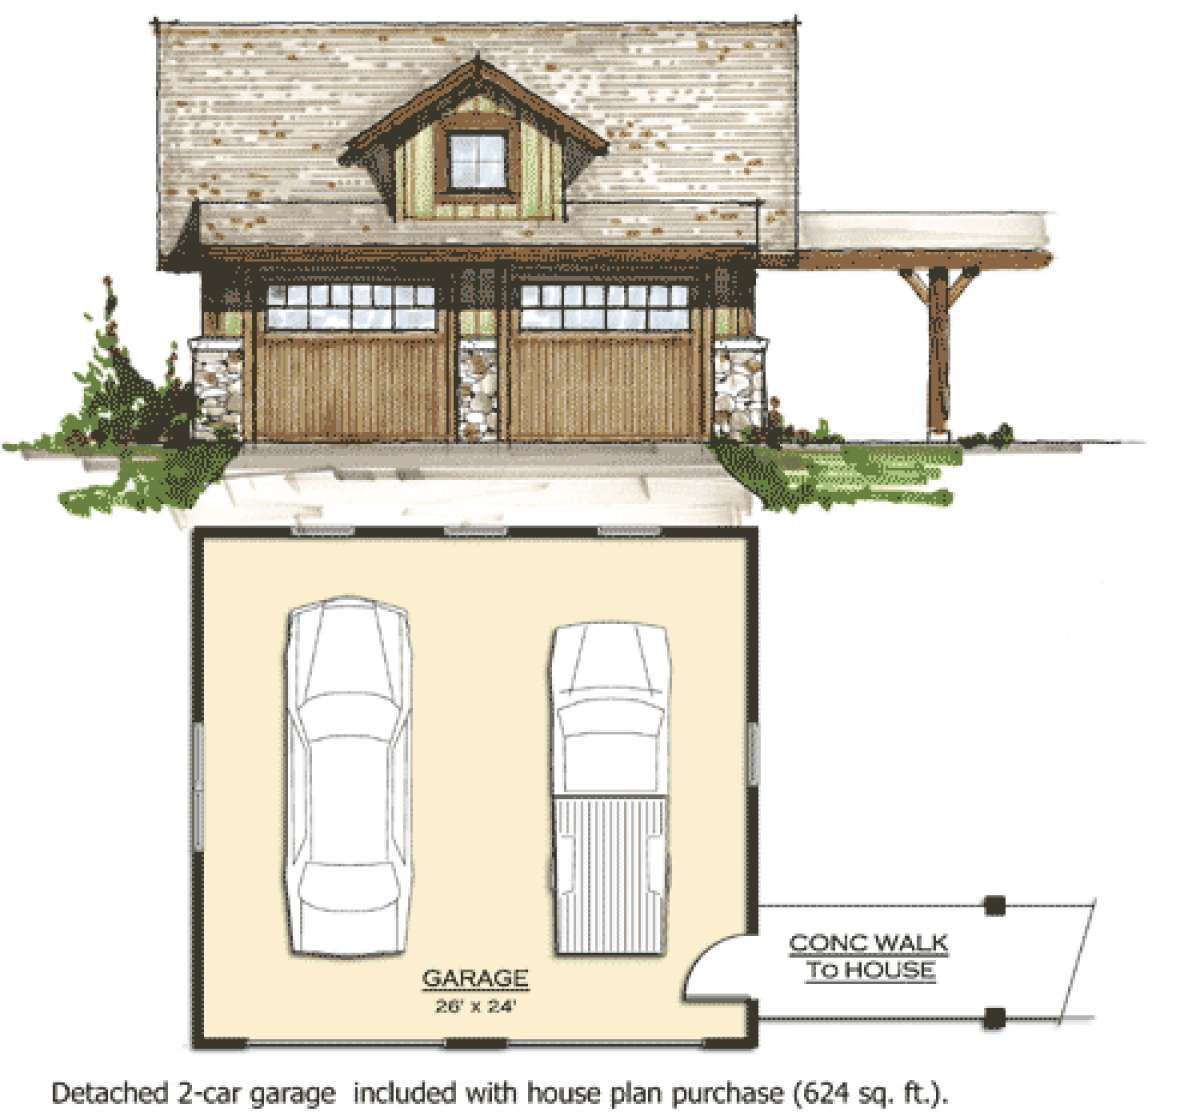 Garage for House Plan #8504-00009